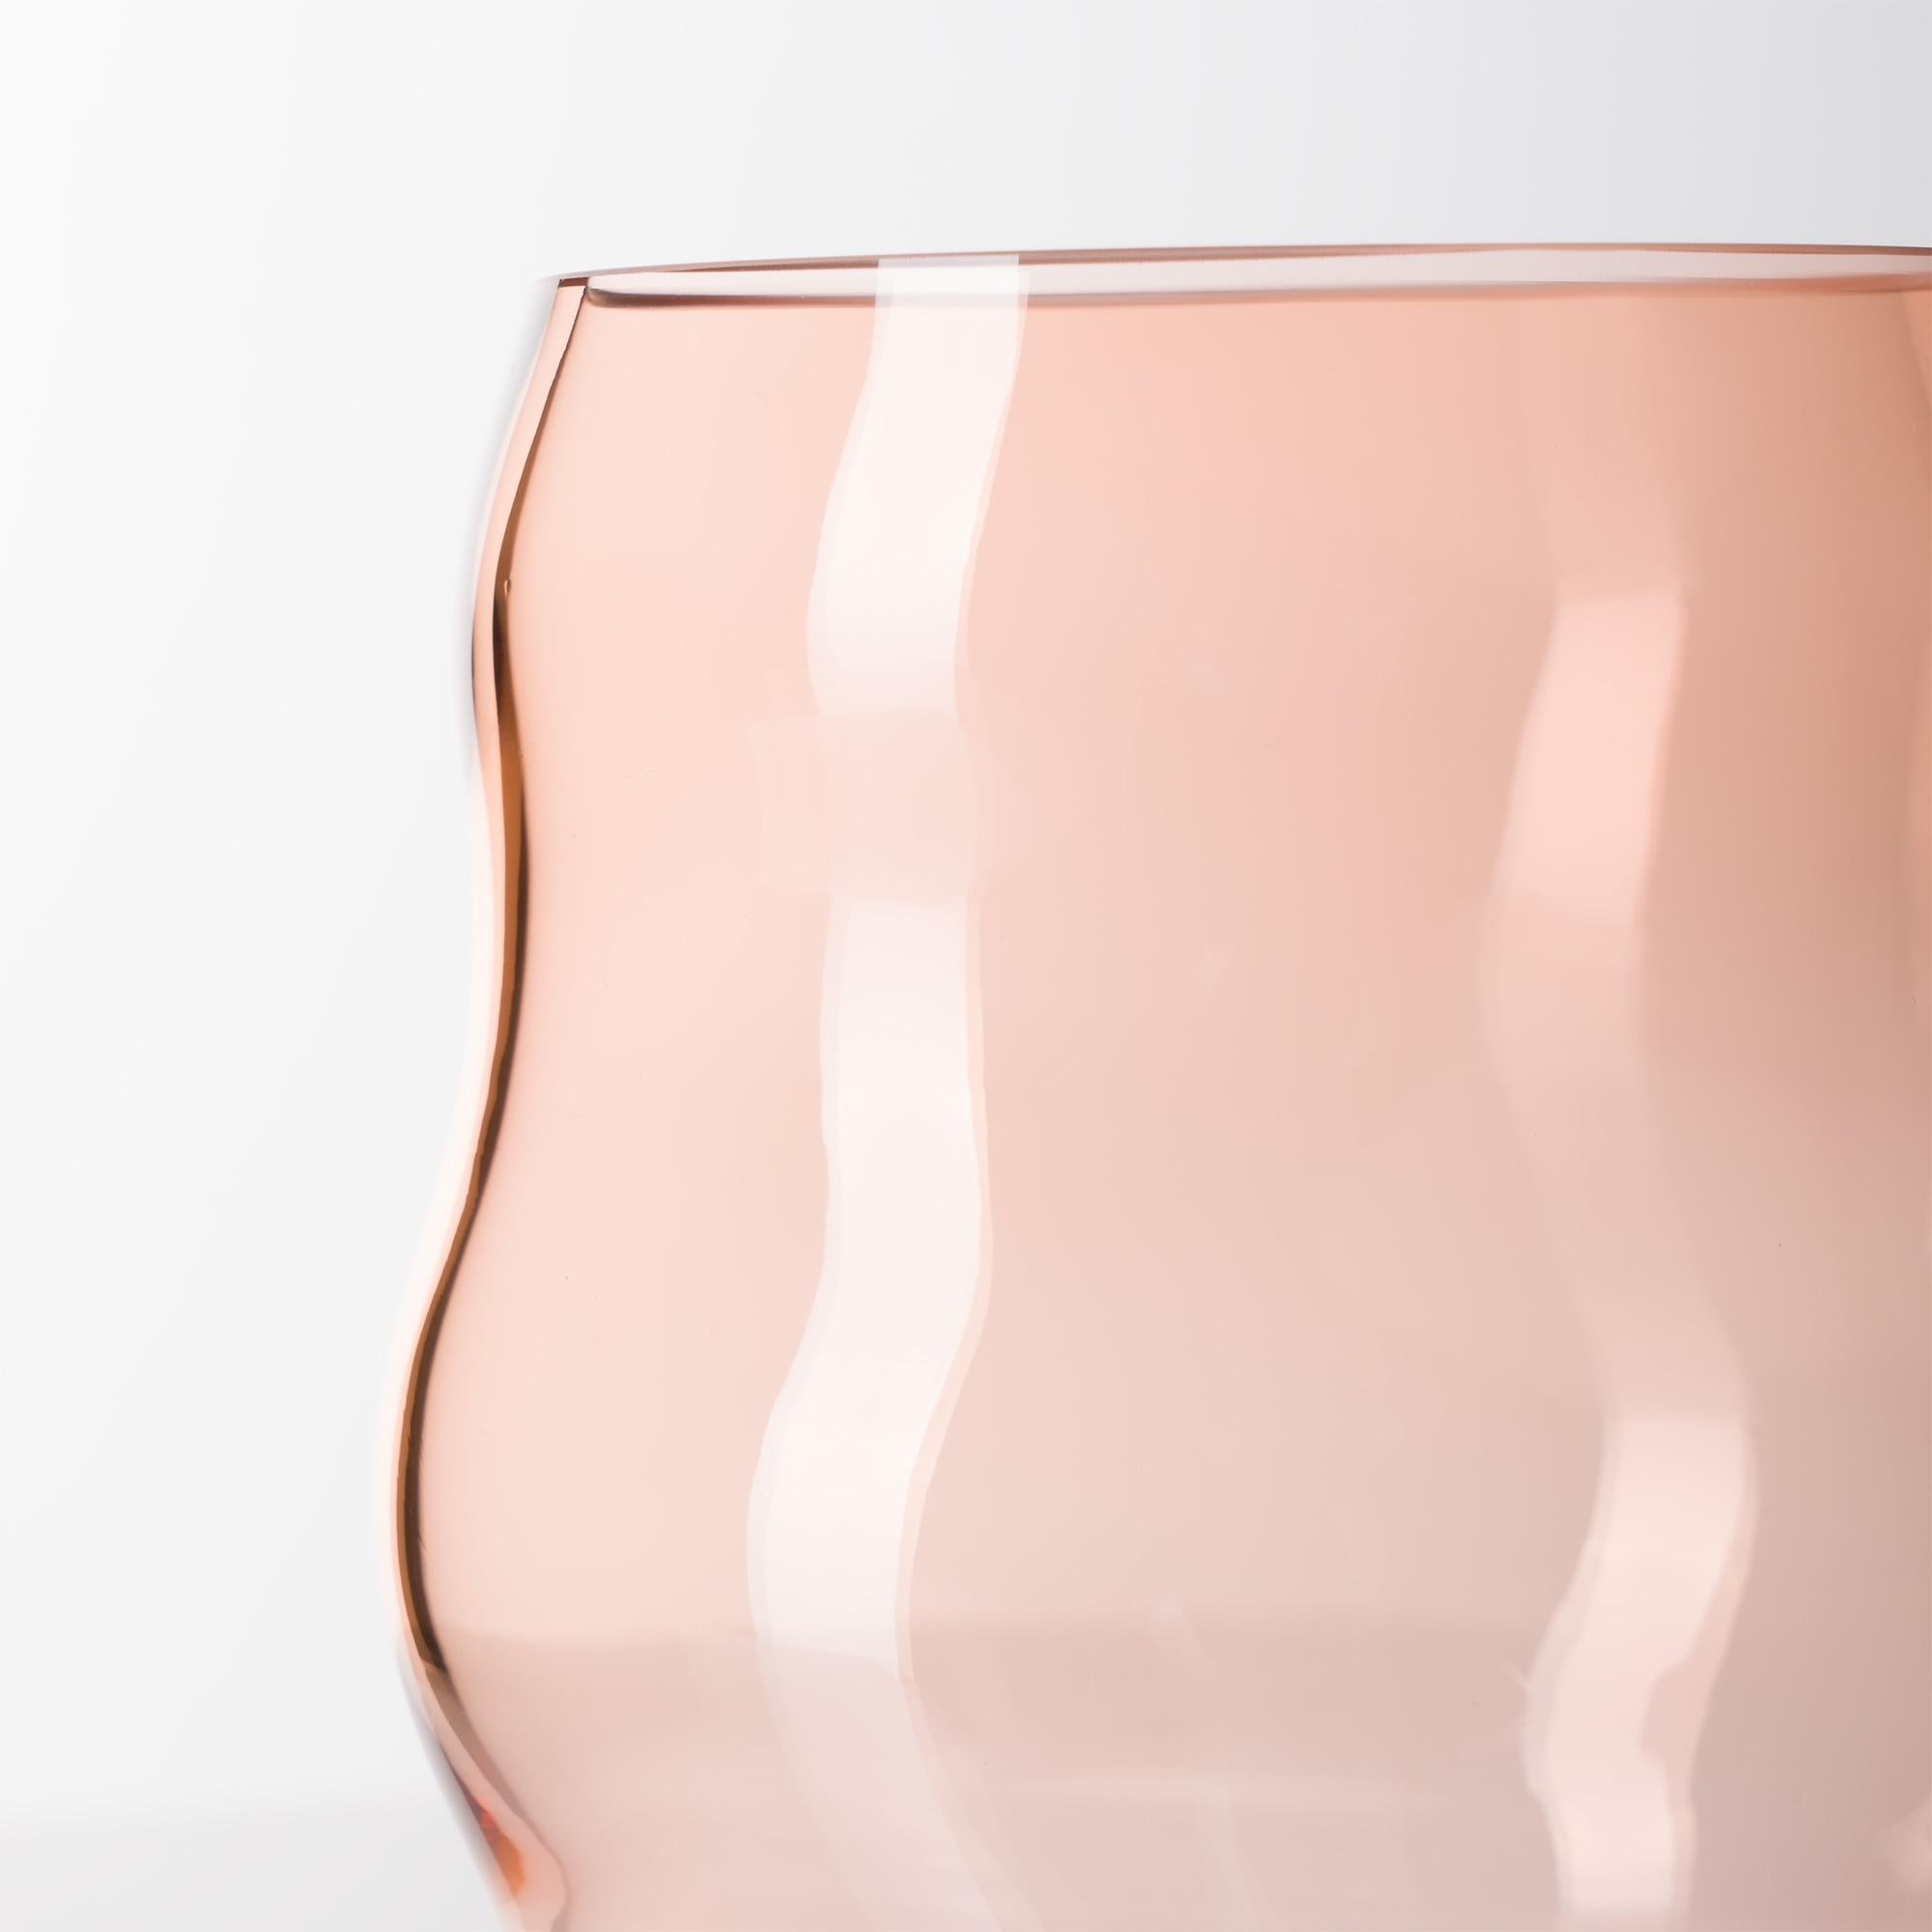 Beauty lies in a reaching for order, but not in grasping it.

These sensuous, full-bodied crystal vases were developed in dialogue with Berlin’s cult florist Marsano and artisanal glassblowers in Bohemia.

Using a combination of formwork and